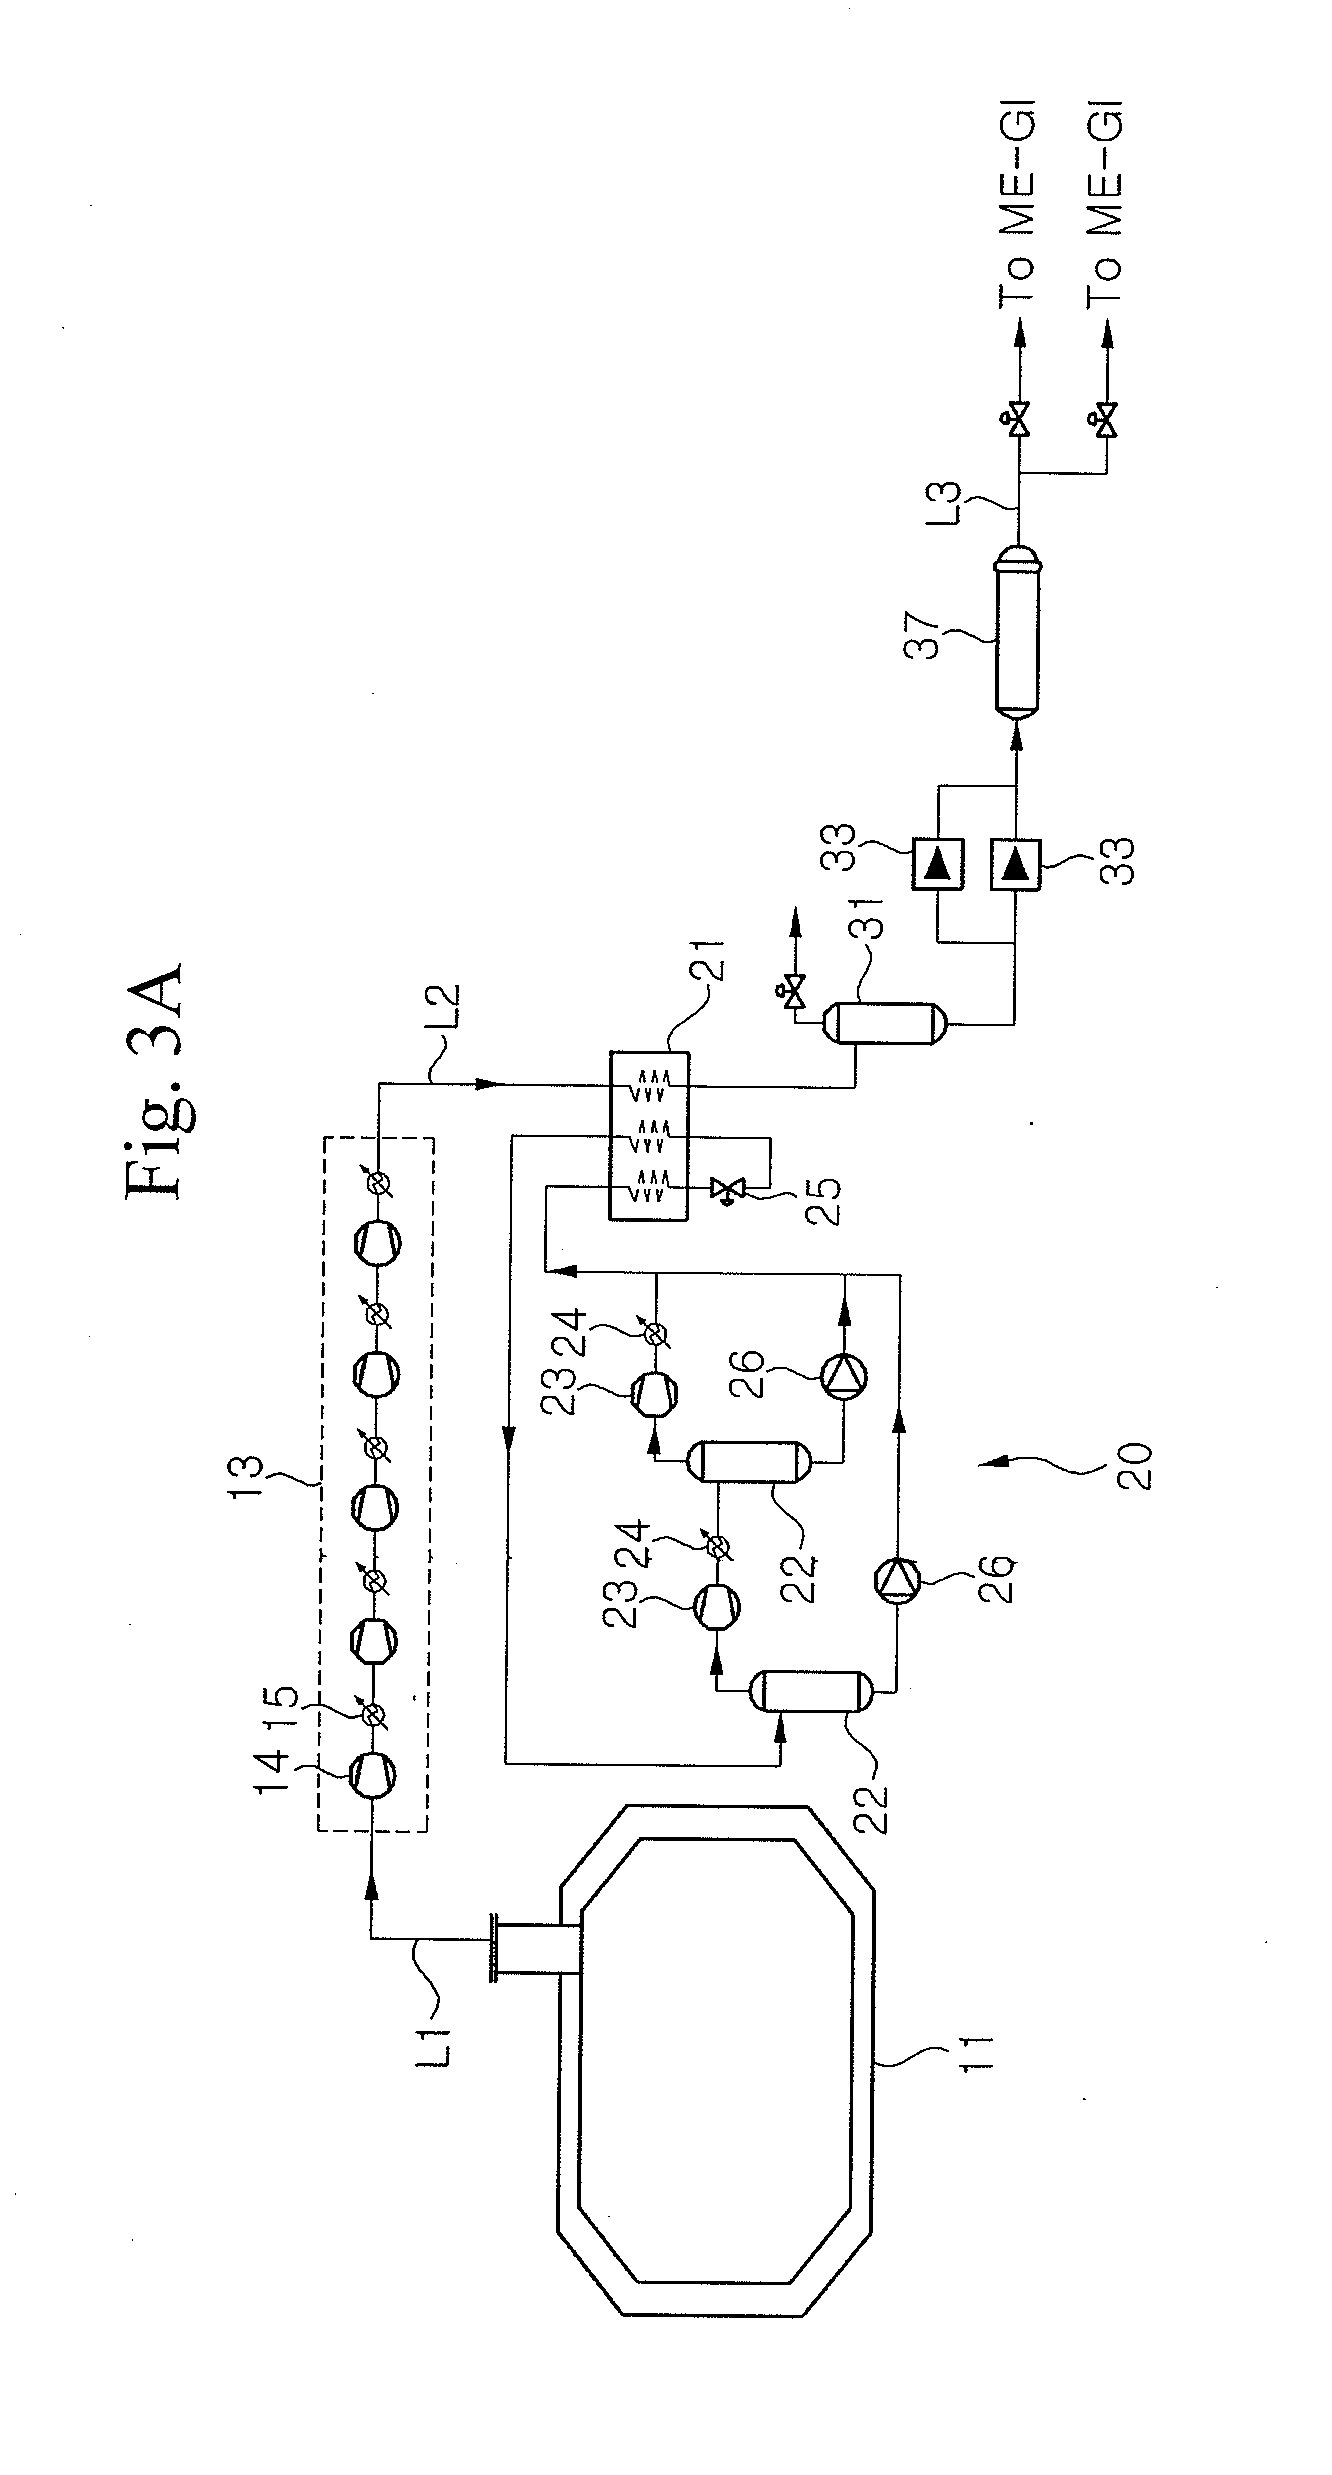 Fuel supply system for marine structure having reliquefaction apparatus and high-pressure natural gas injection engine